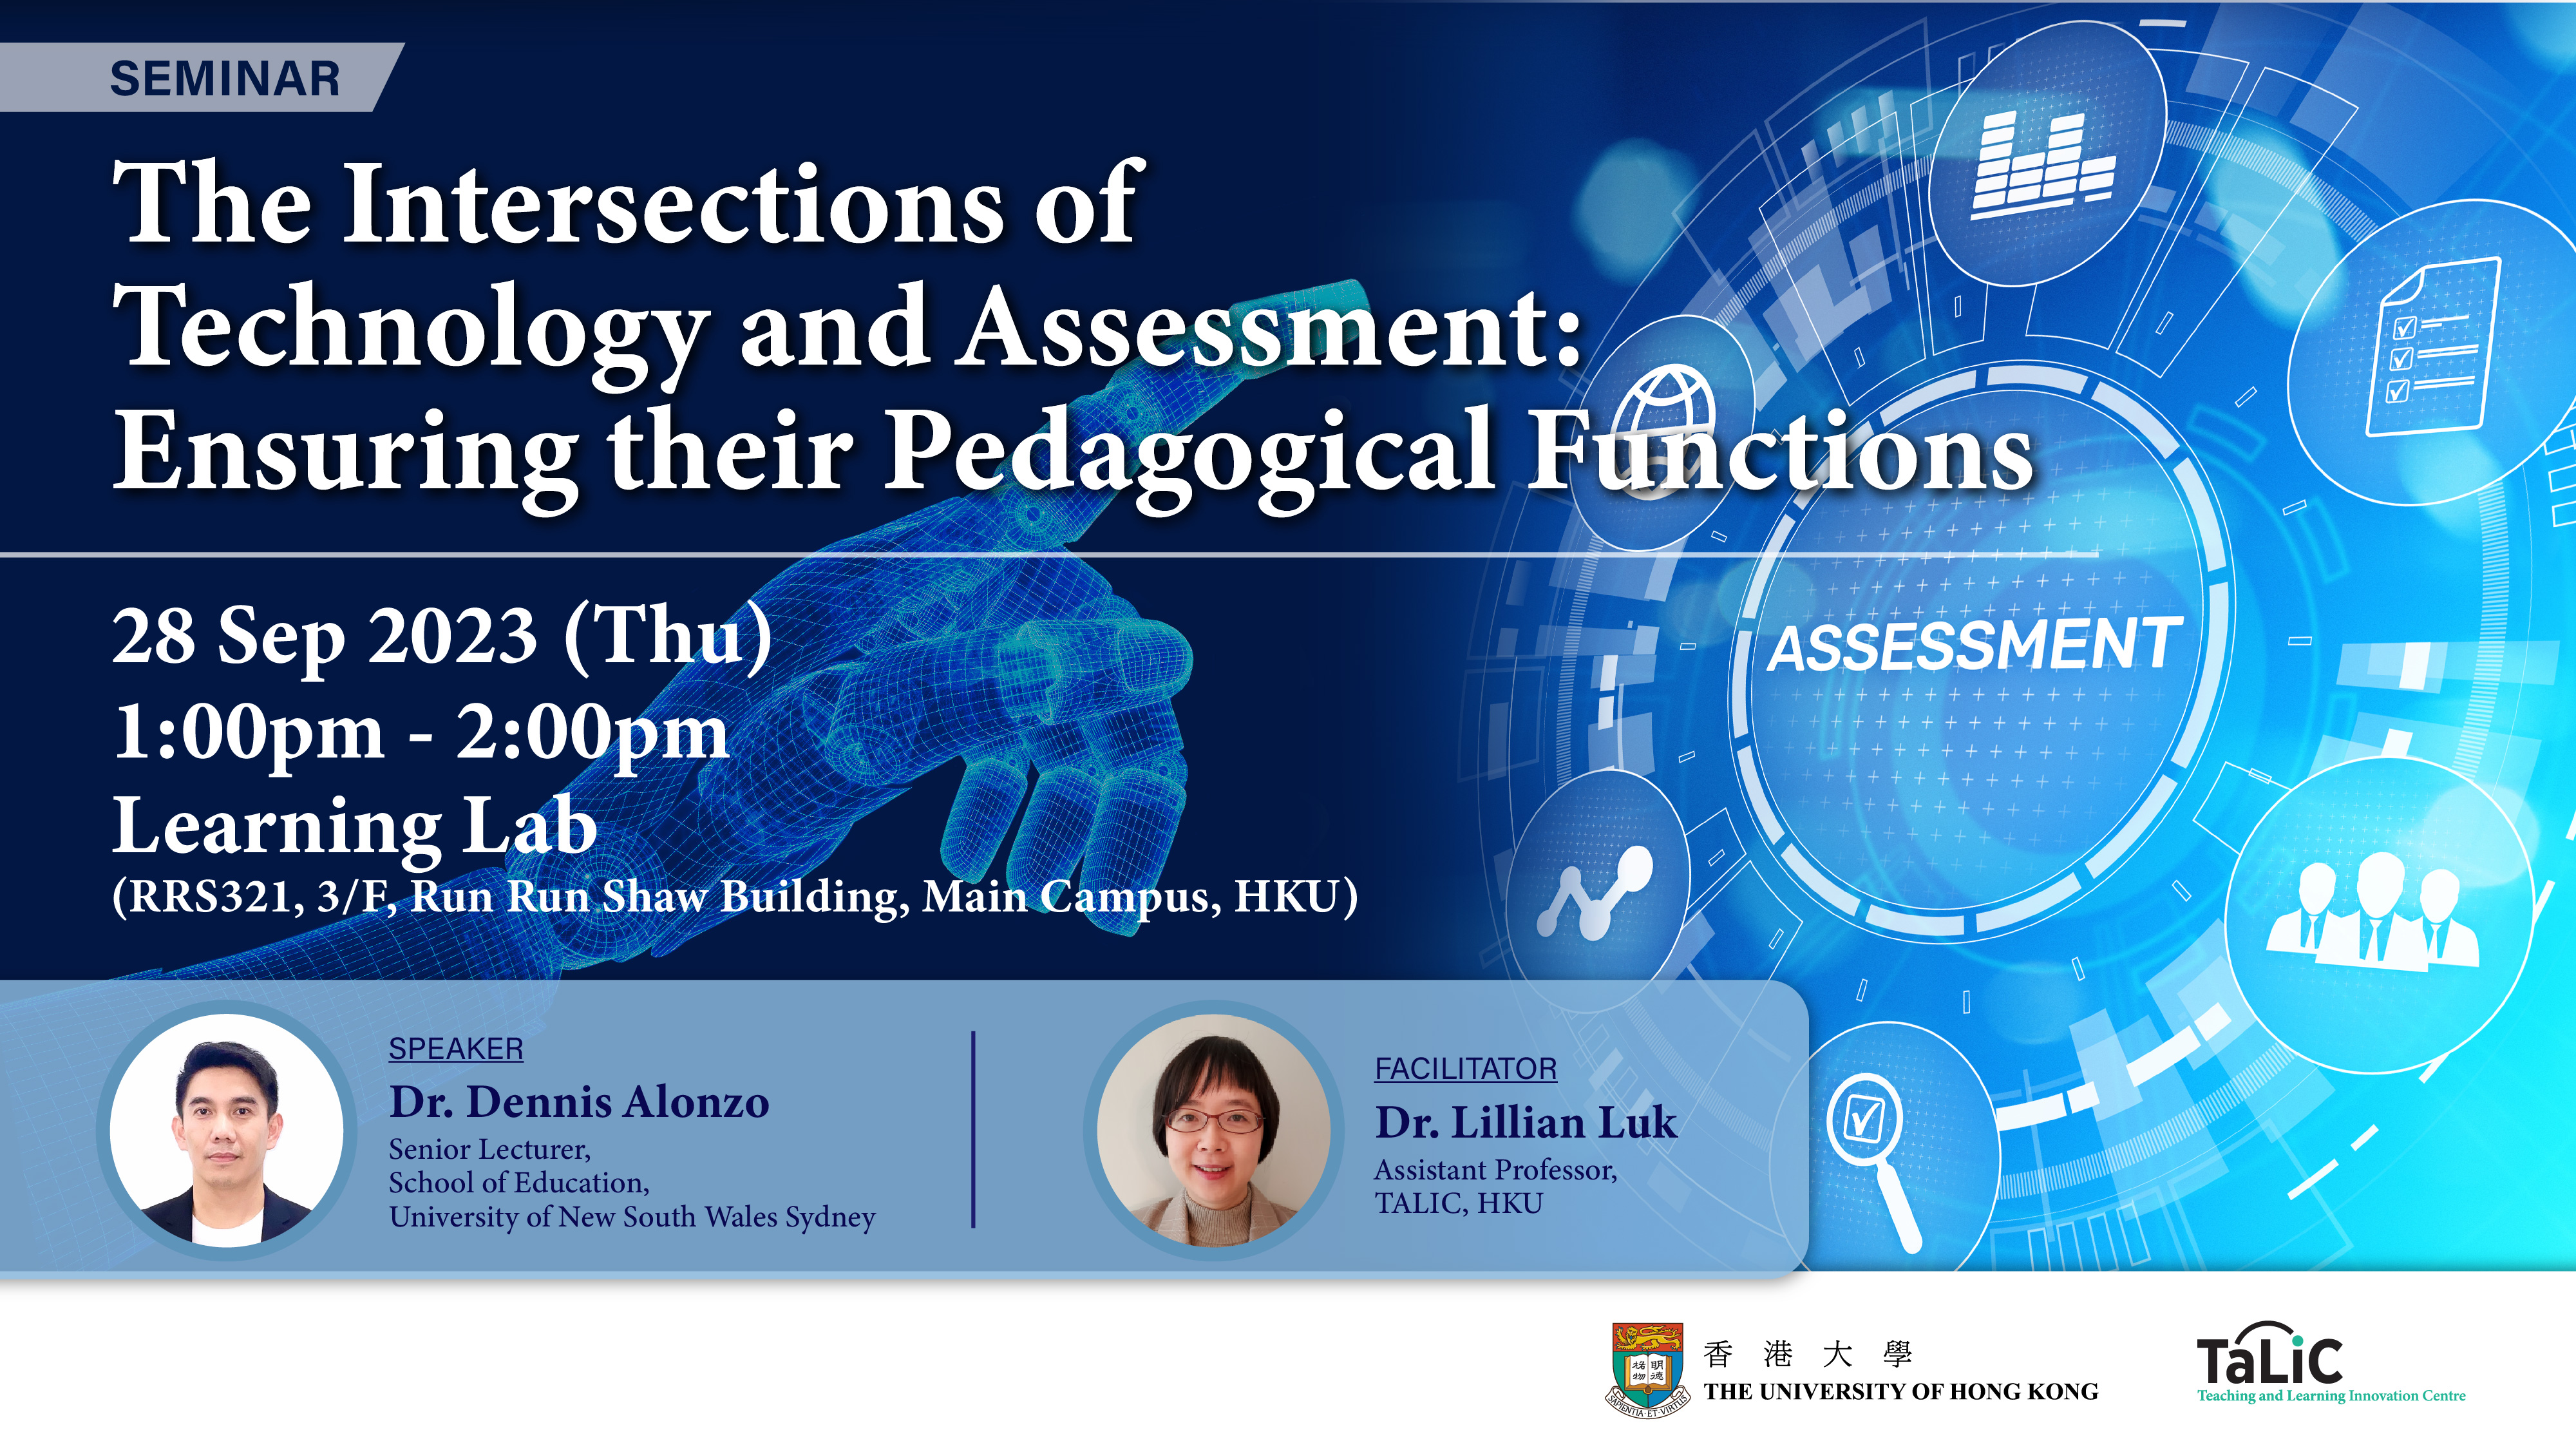 The Intersections of Technology and Assessment: Ensuring their Pedagogical Functions